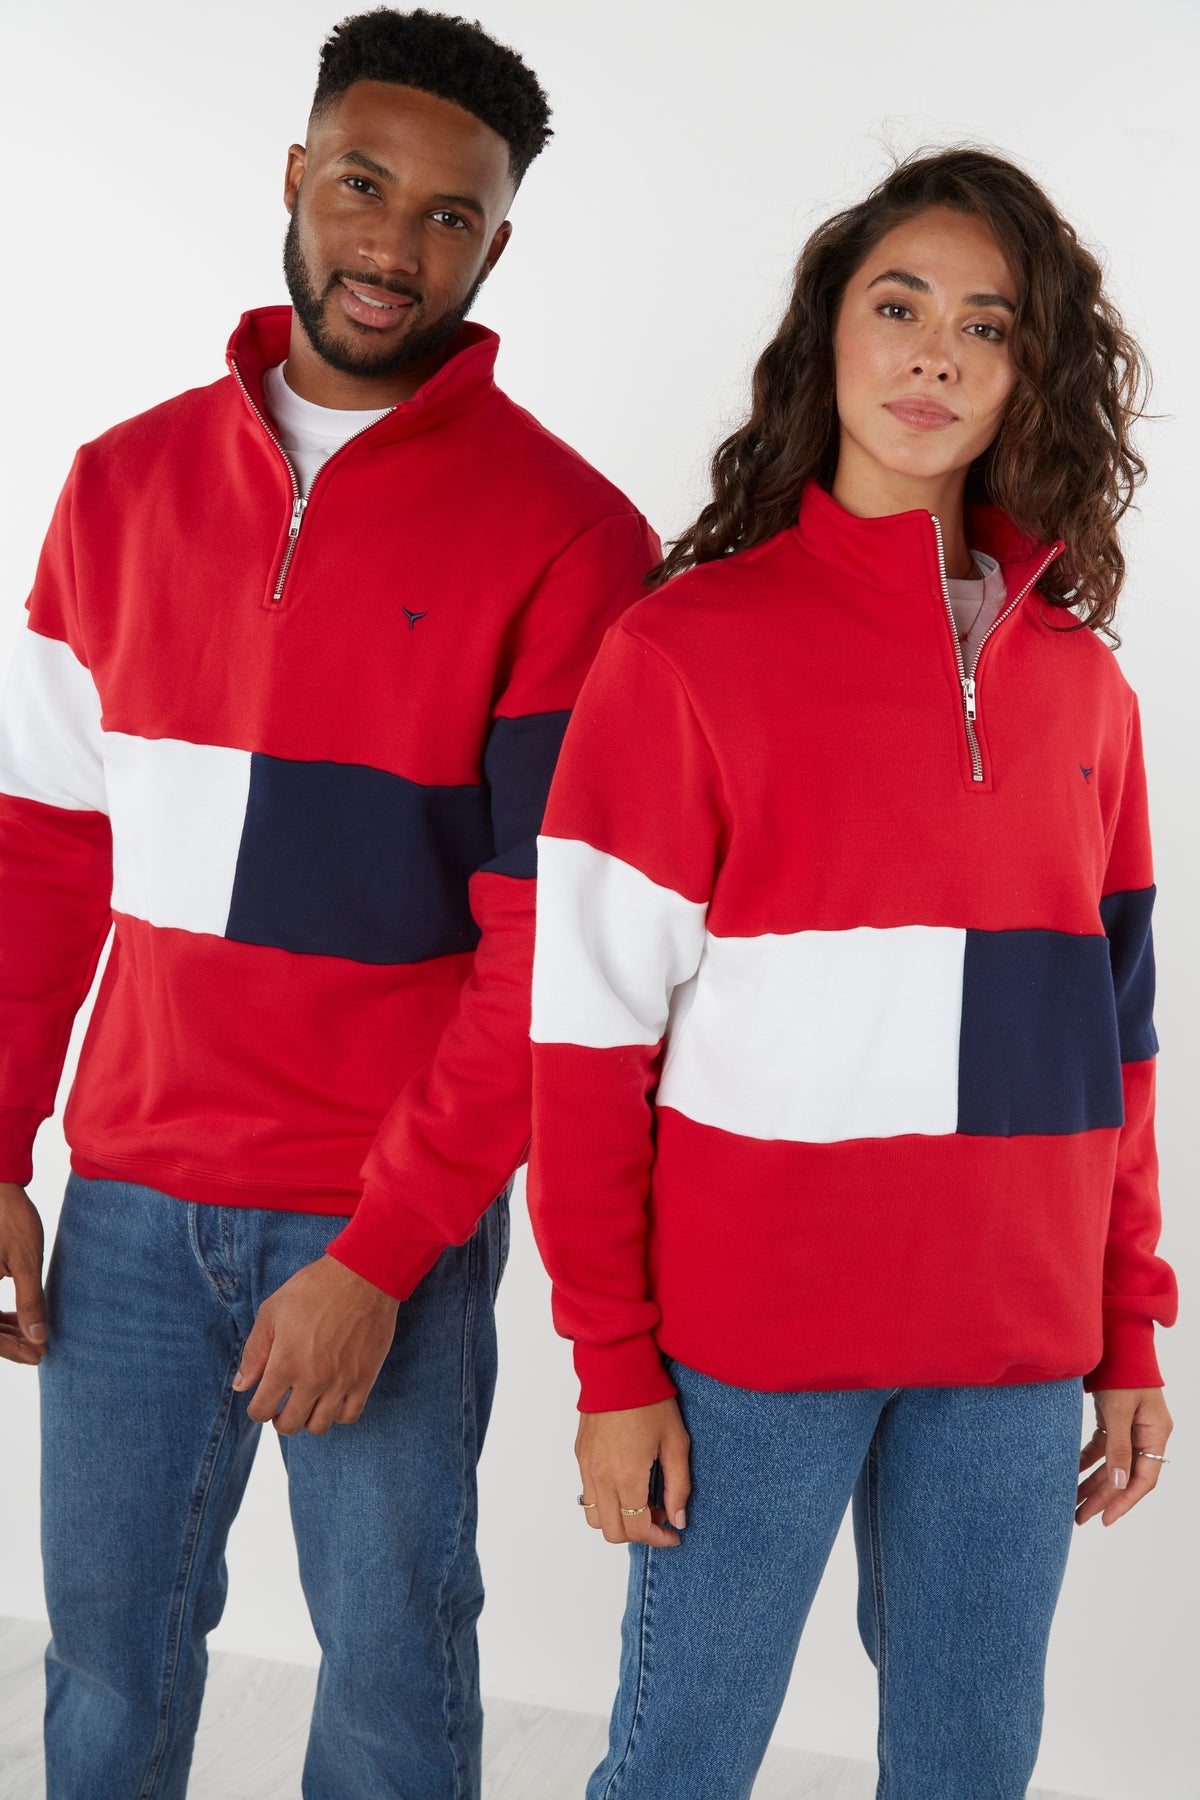 Norfolk Unisex Quarter Zip Sweatshirt - Red - Whale Of A Time Clothing